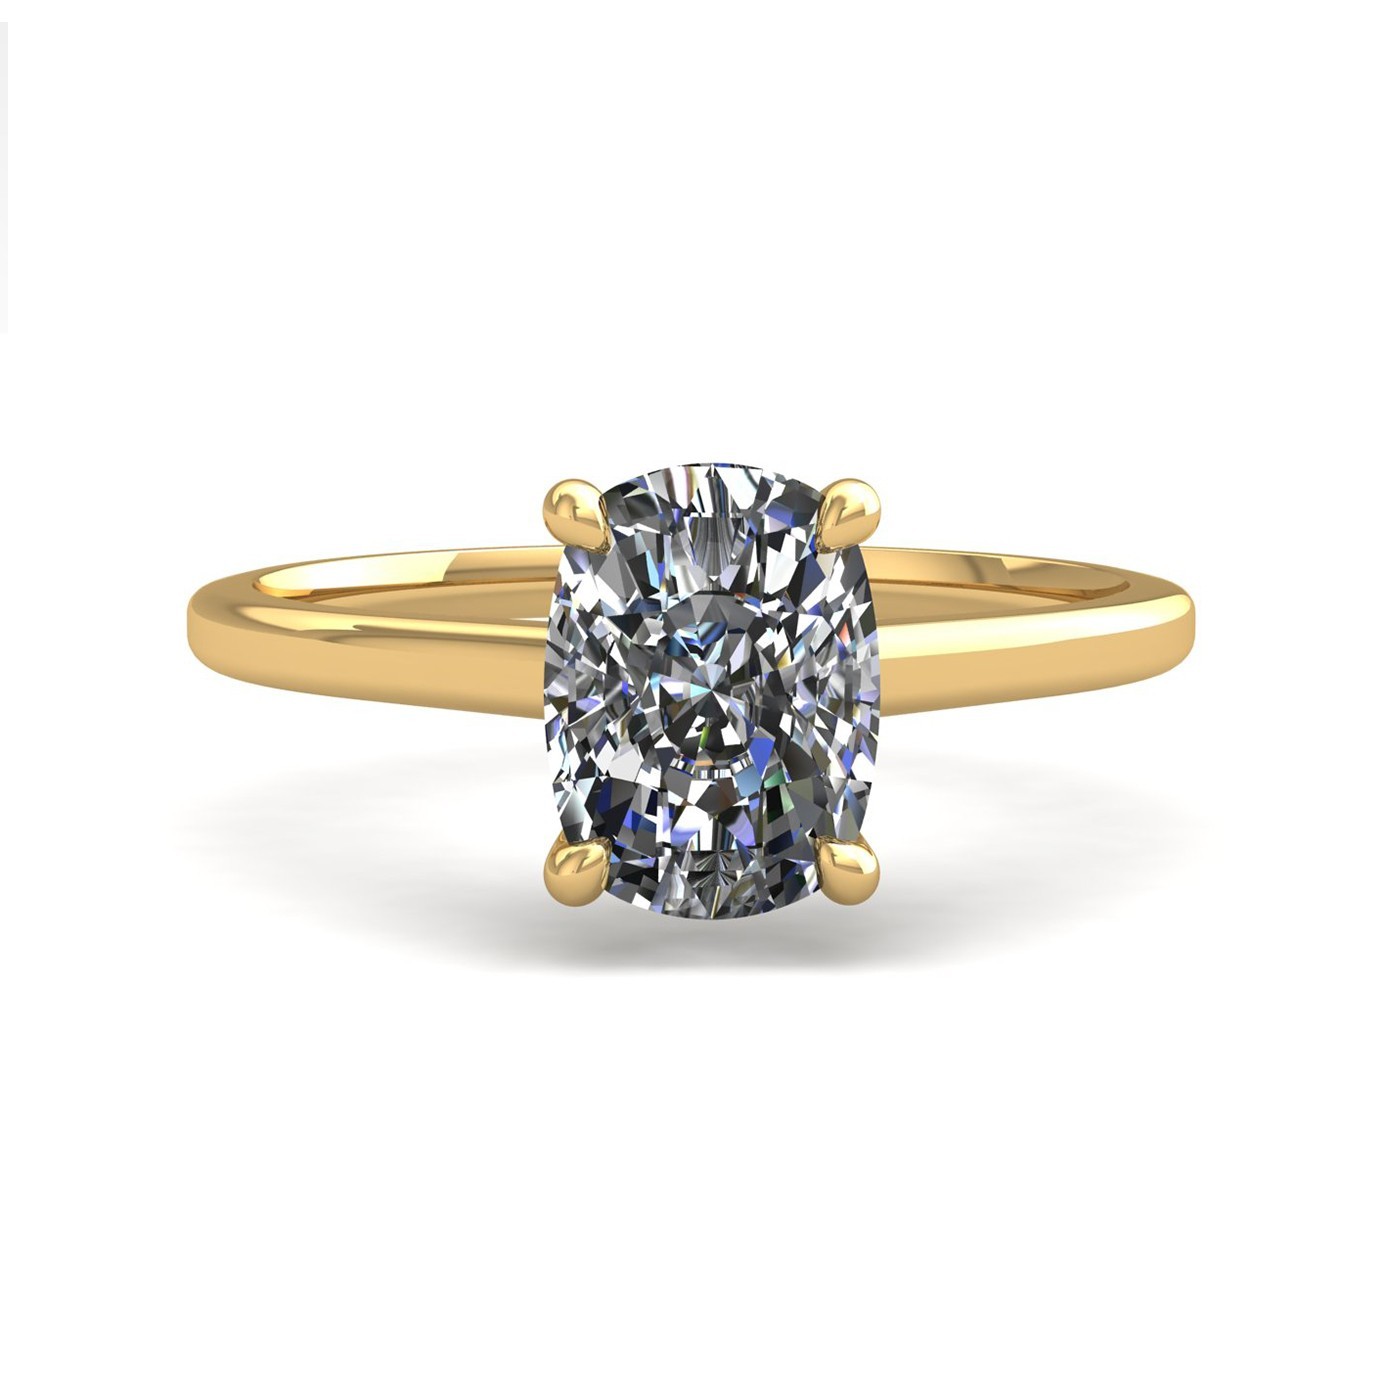 18k yellow gold  2.50 ct 4 prongs solitaire elongated cushion cut diamond engagement ring with whisper thin band Photos & images